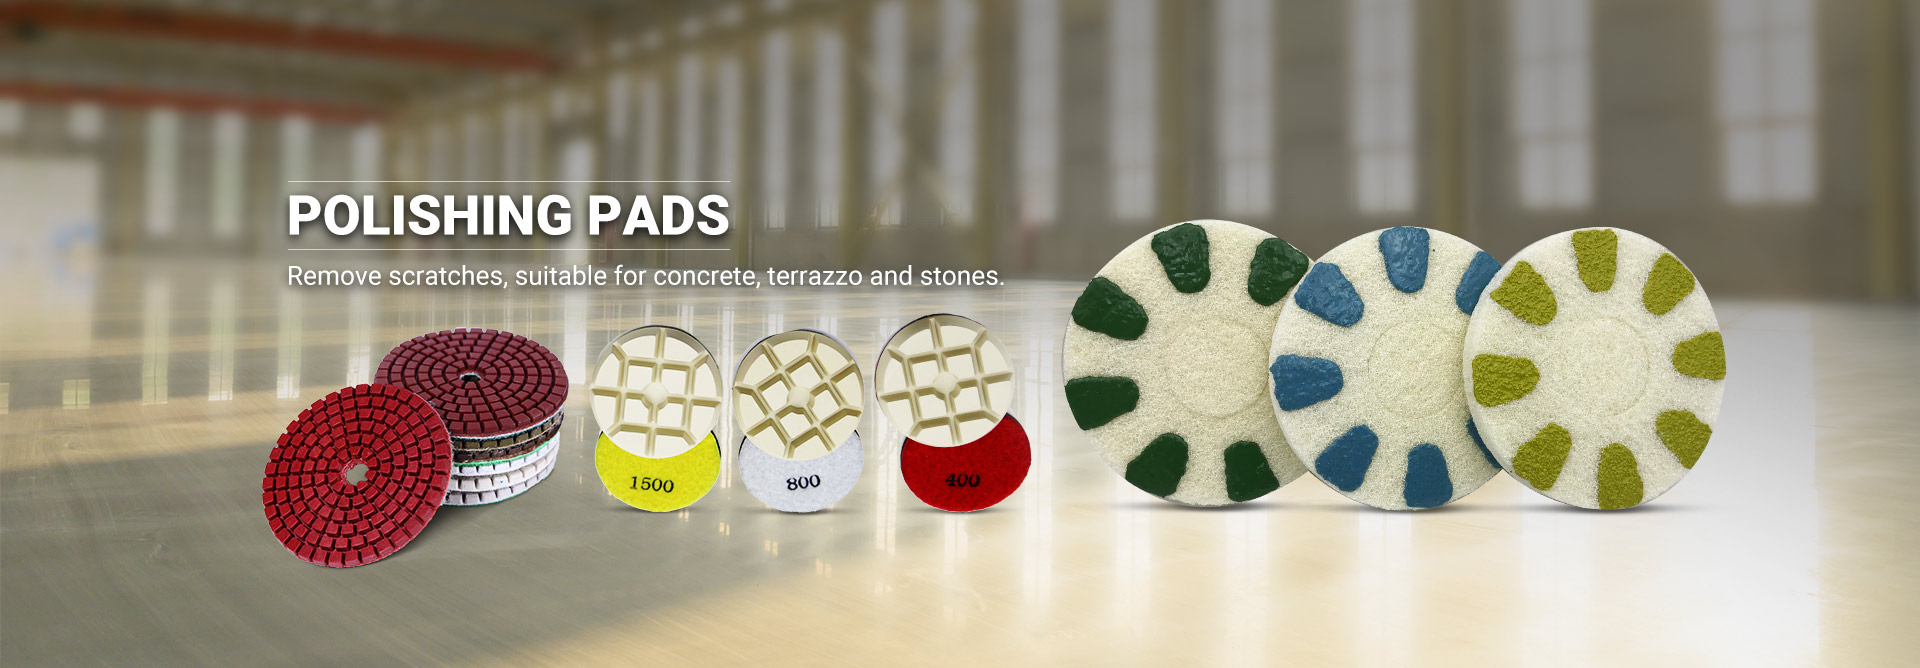 Resin bond wet or dry diamond polishing pads for concrete and stones